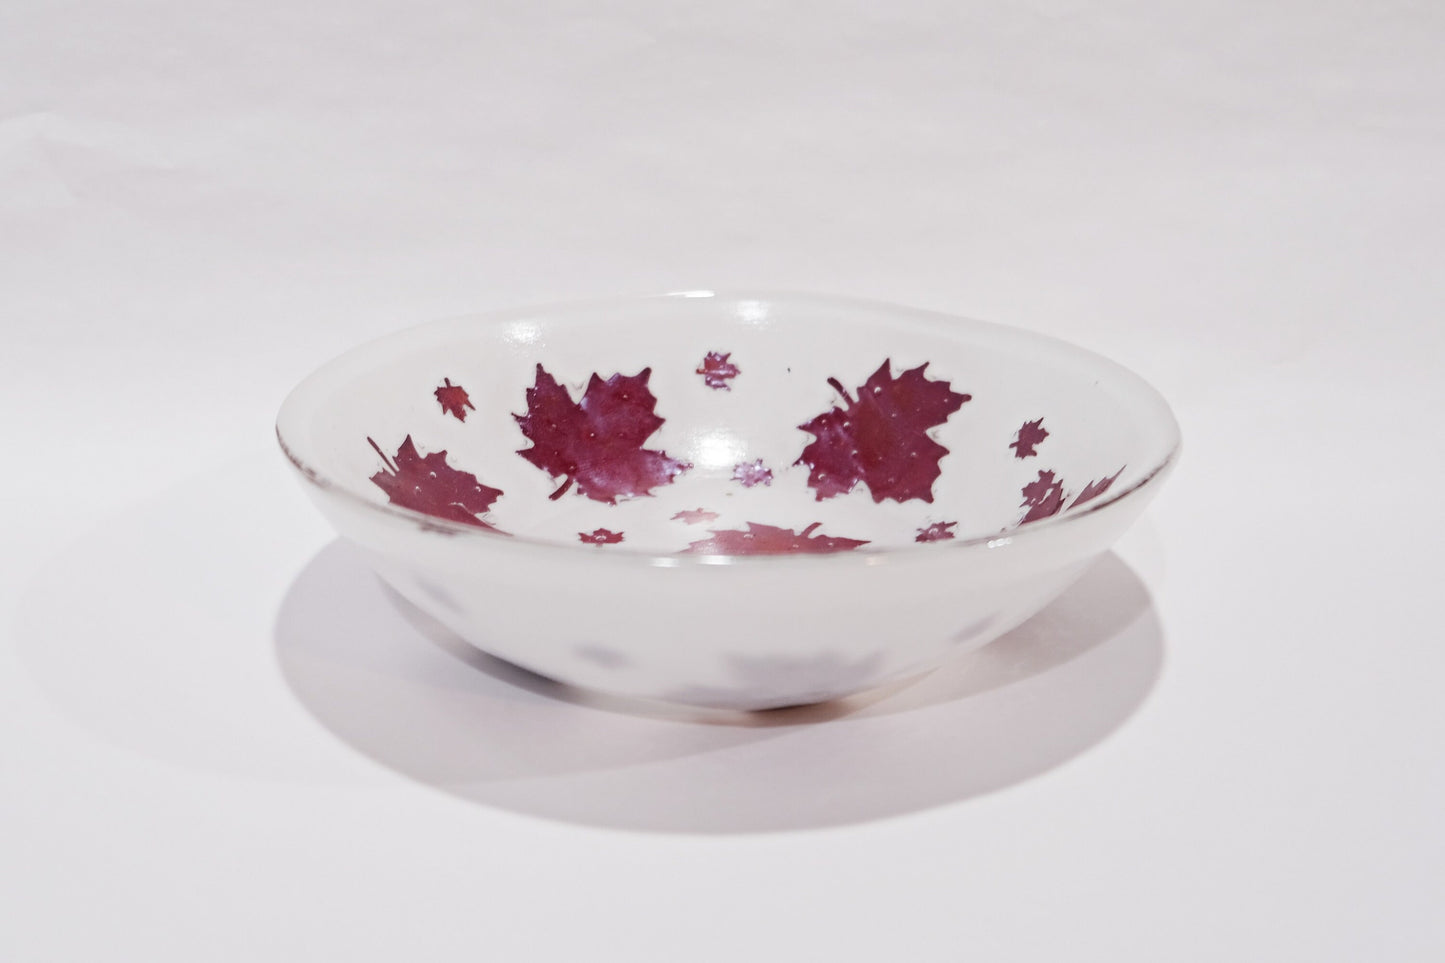 Elegant 8.5 Inch Wide white Fused Glass Bowl with real Copper Leaf Design - Perfect for Fall Decor